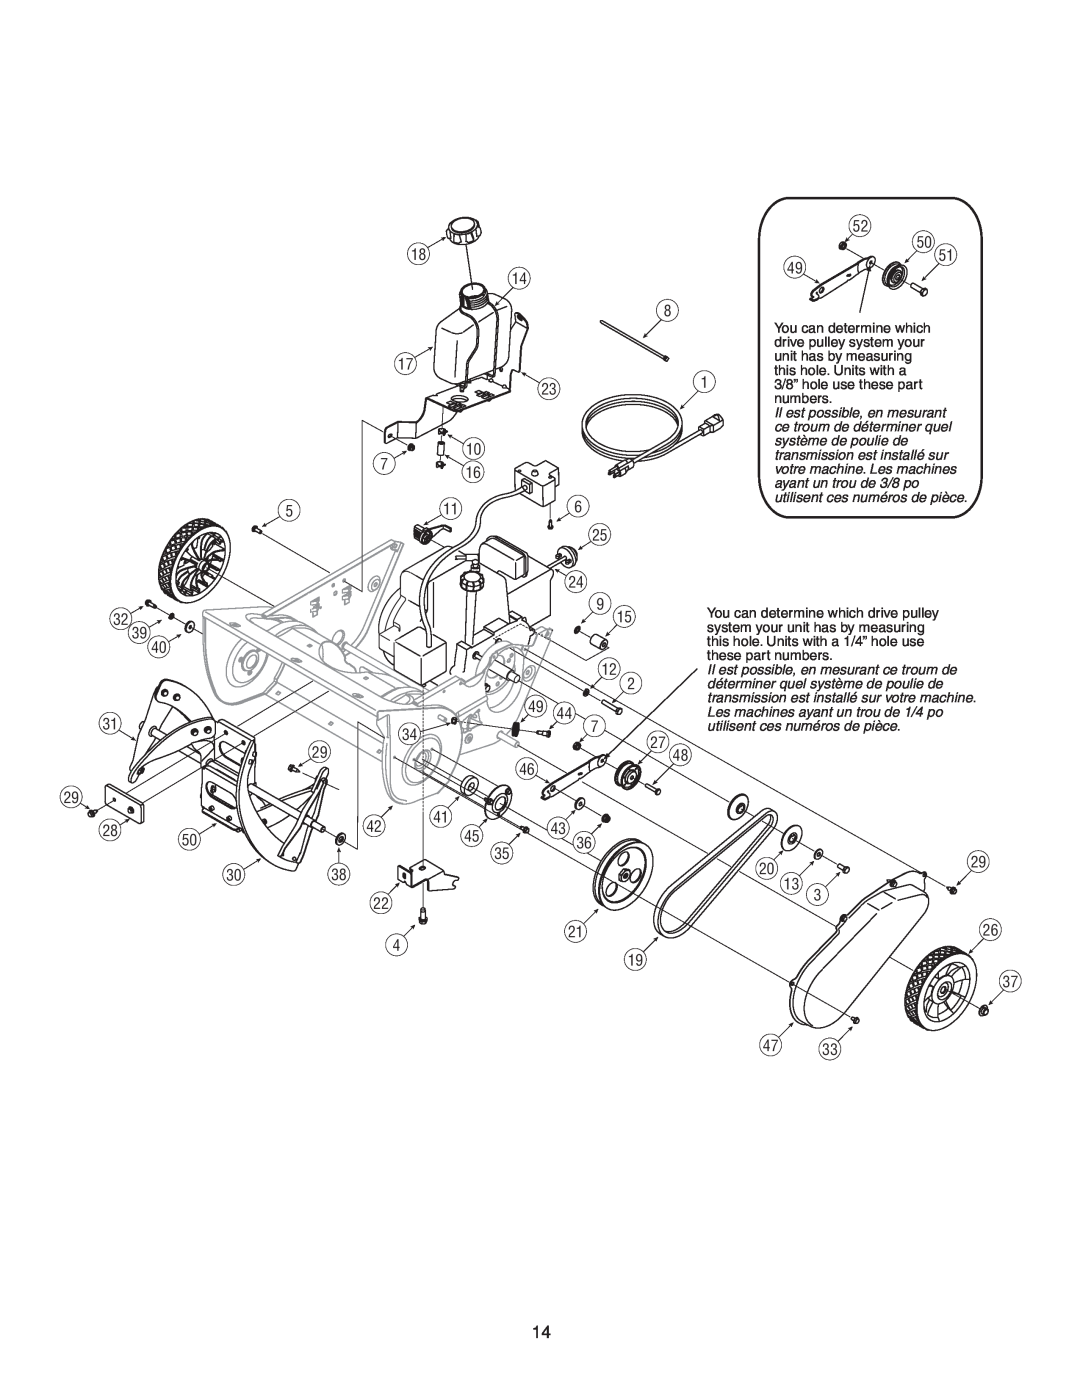 Yard-Man 2B5 & 295 manual drive pulley system your 